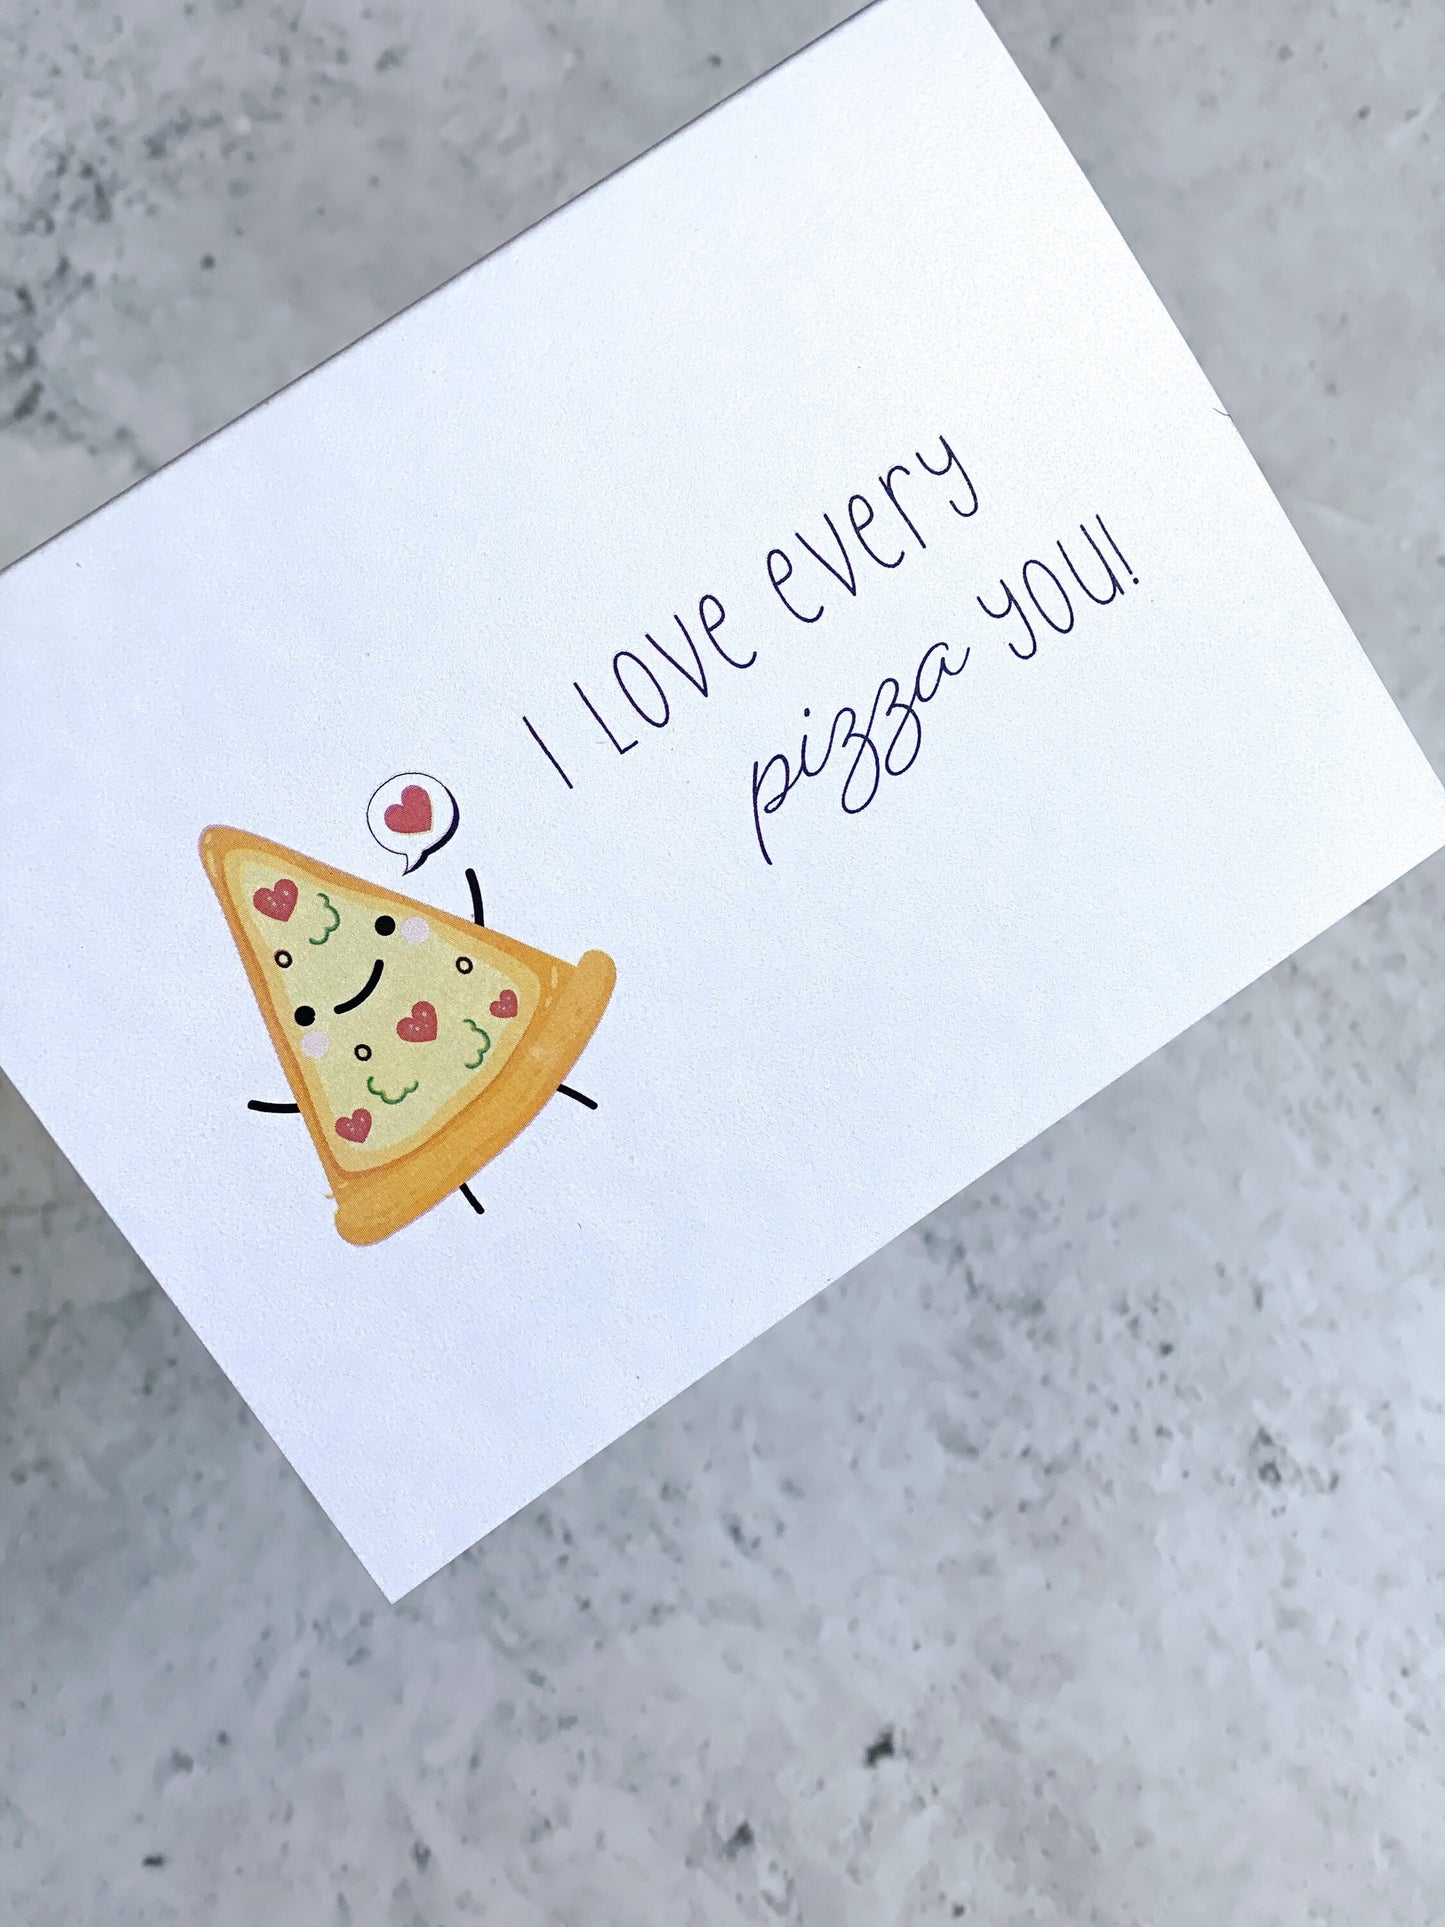 Love every Pizza you